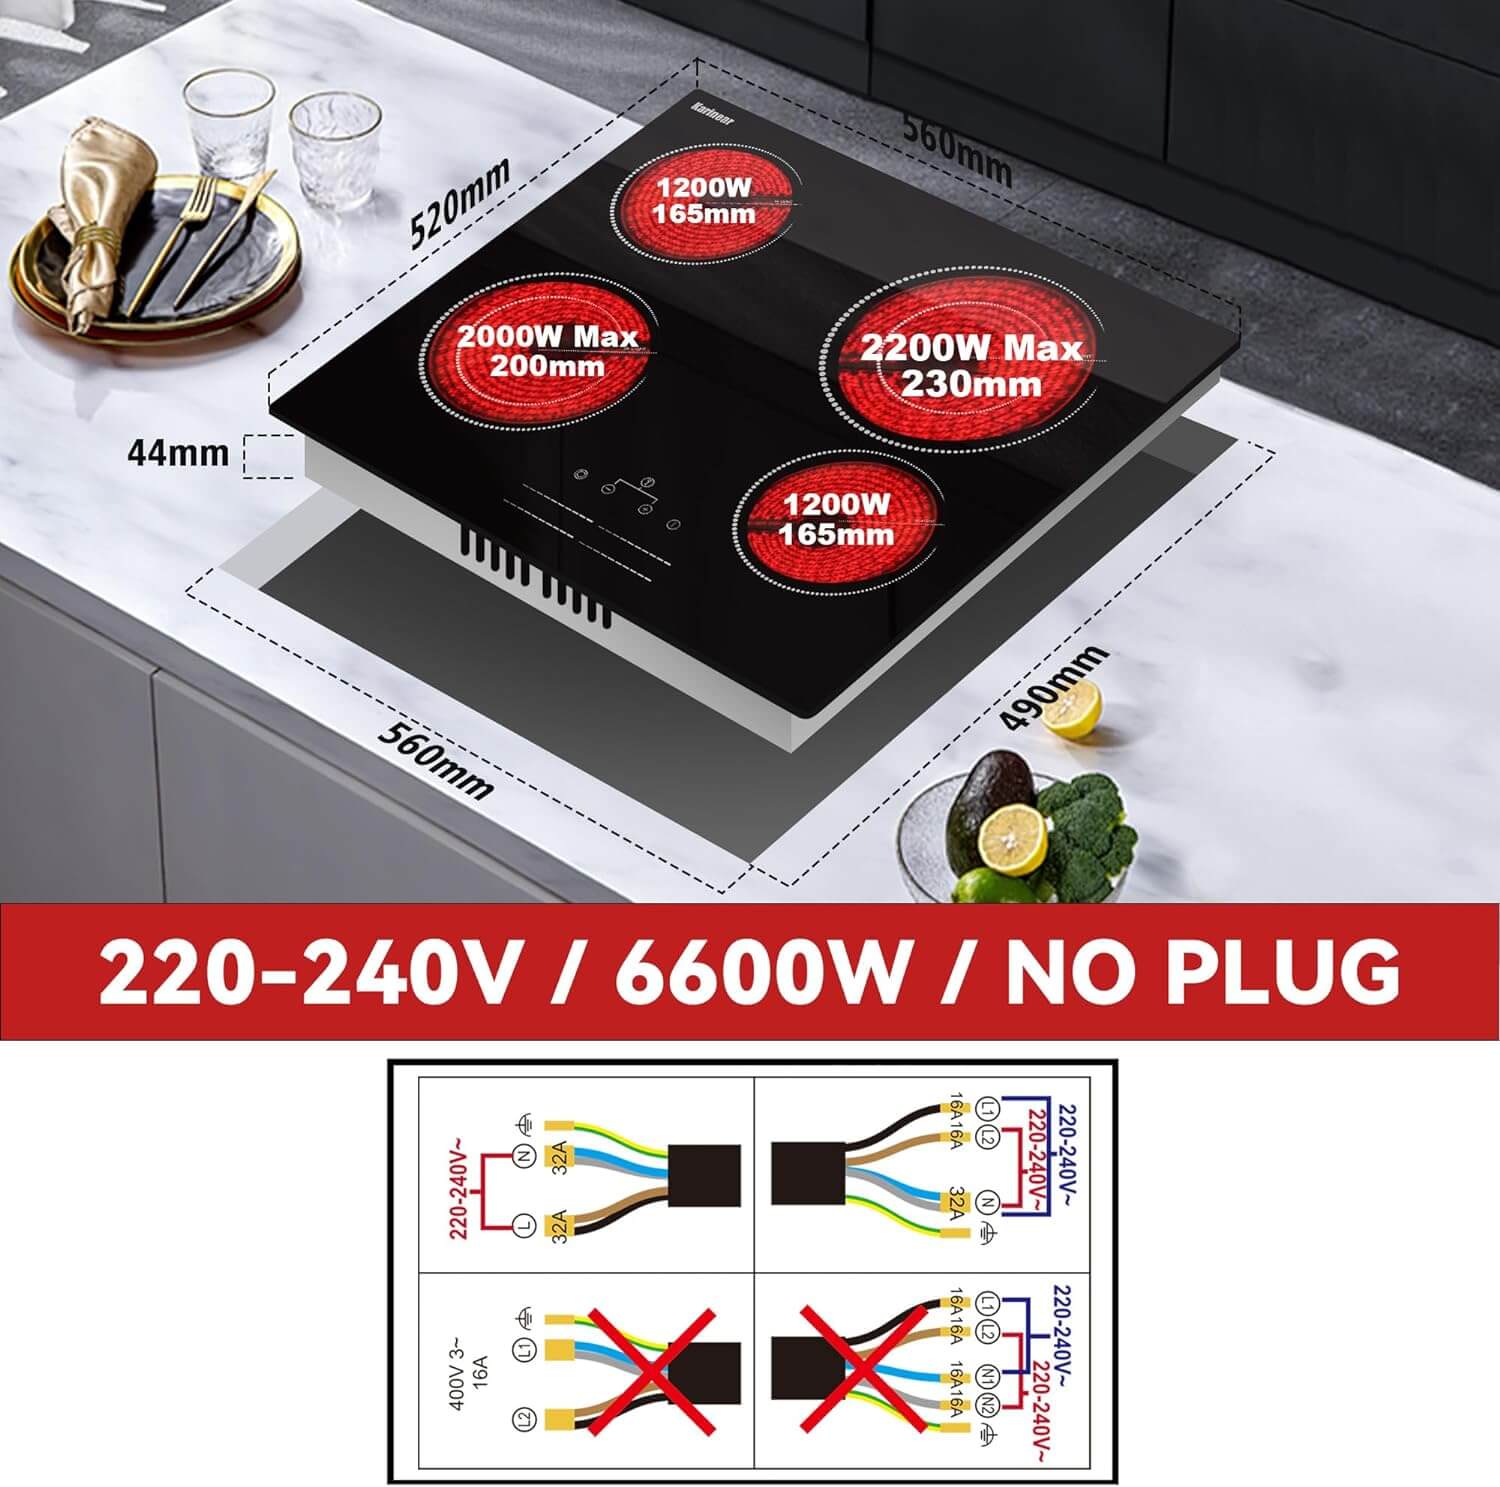 Karinear self-sufficient hob 60 cm with dual ring cooking zones, glass ceramic hob 4 plates, 6600W hob 4 hobs built-in with child safety lock, timer, touch control, 220-240V